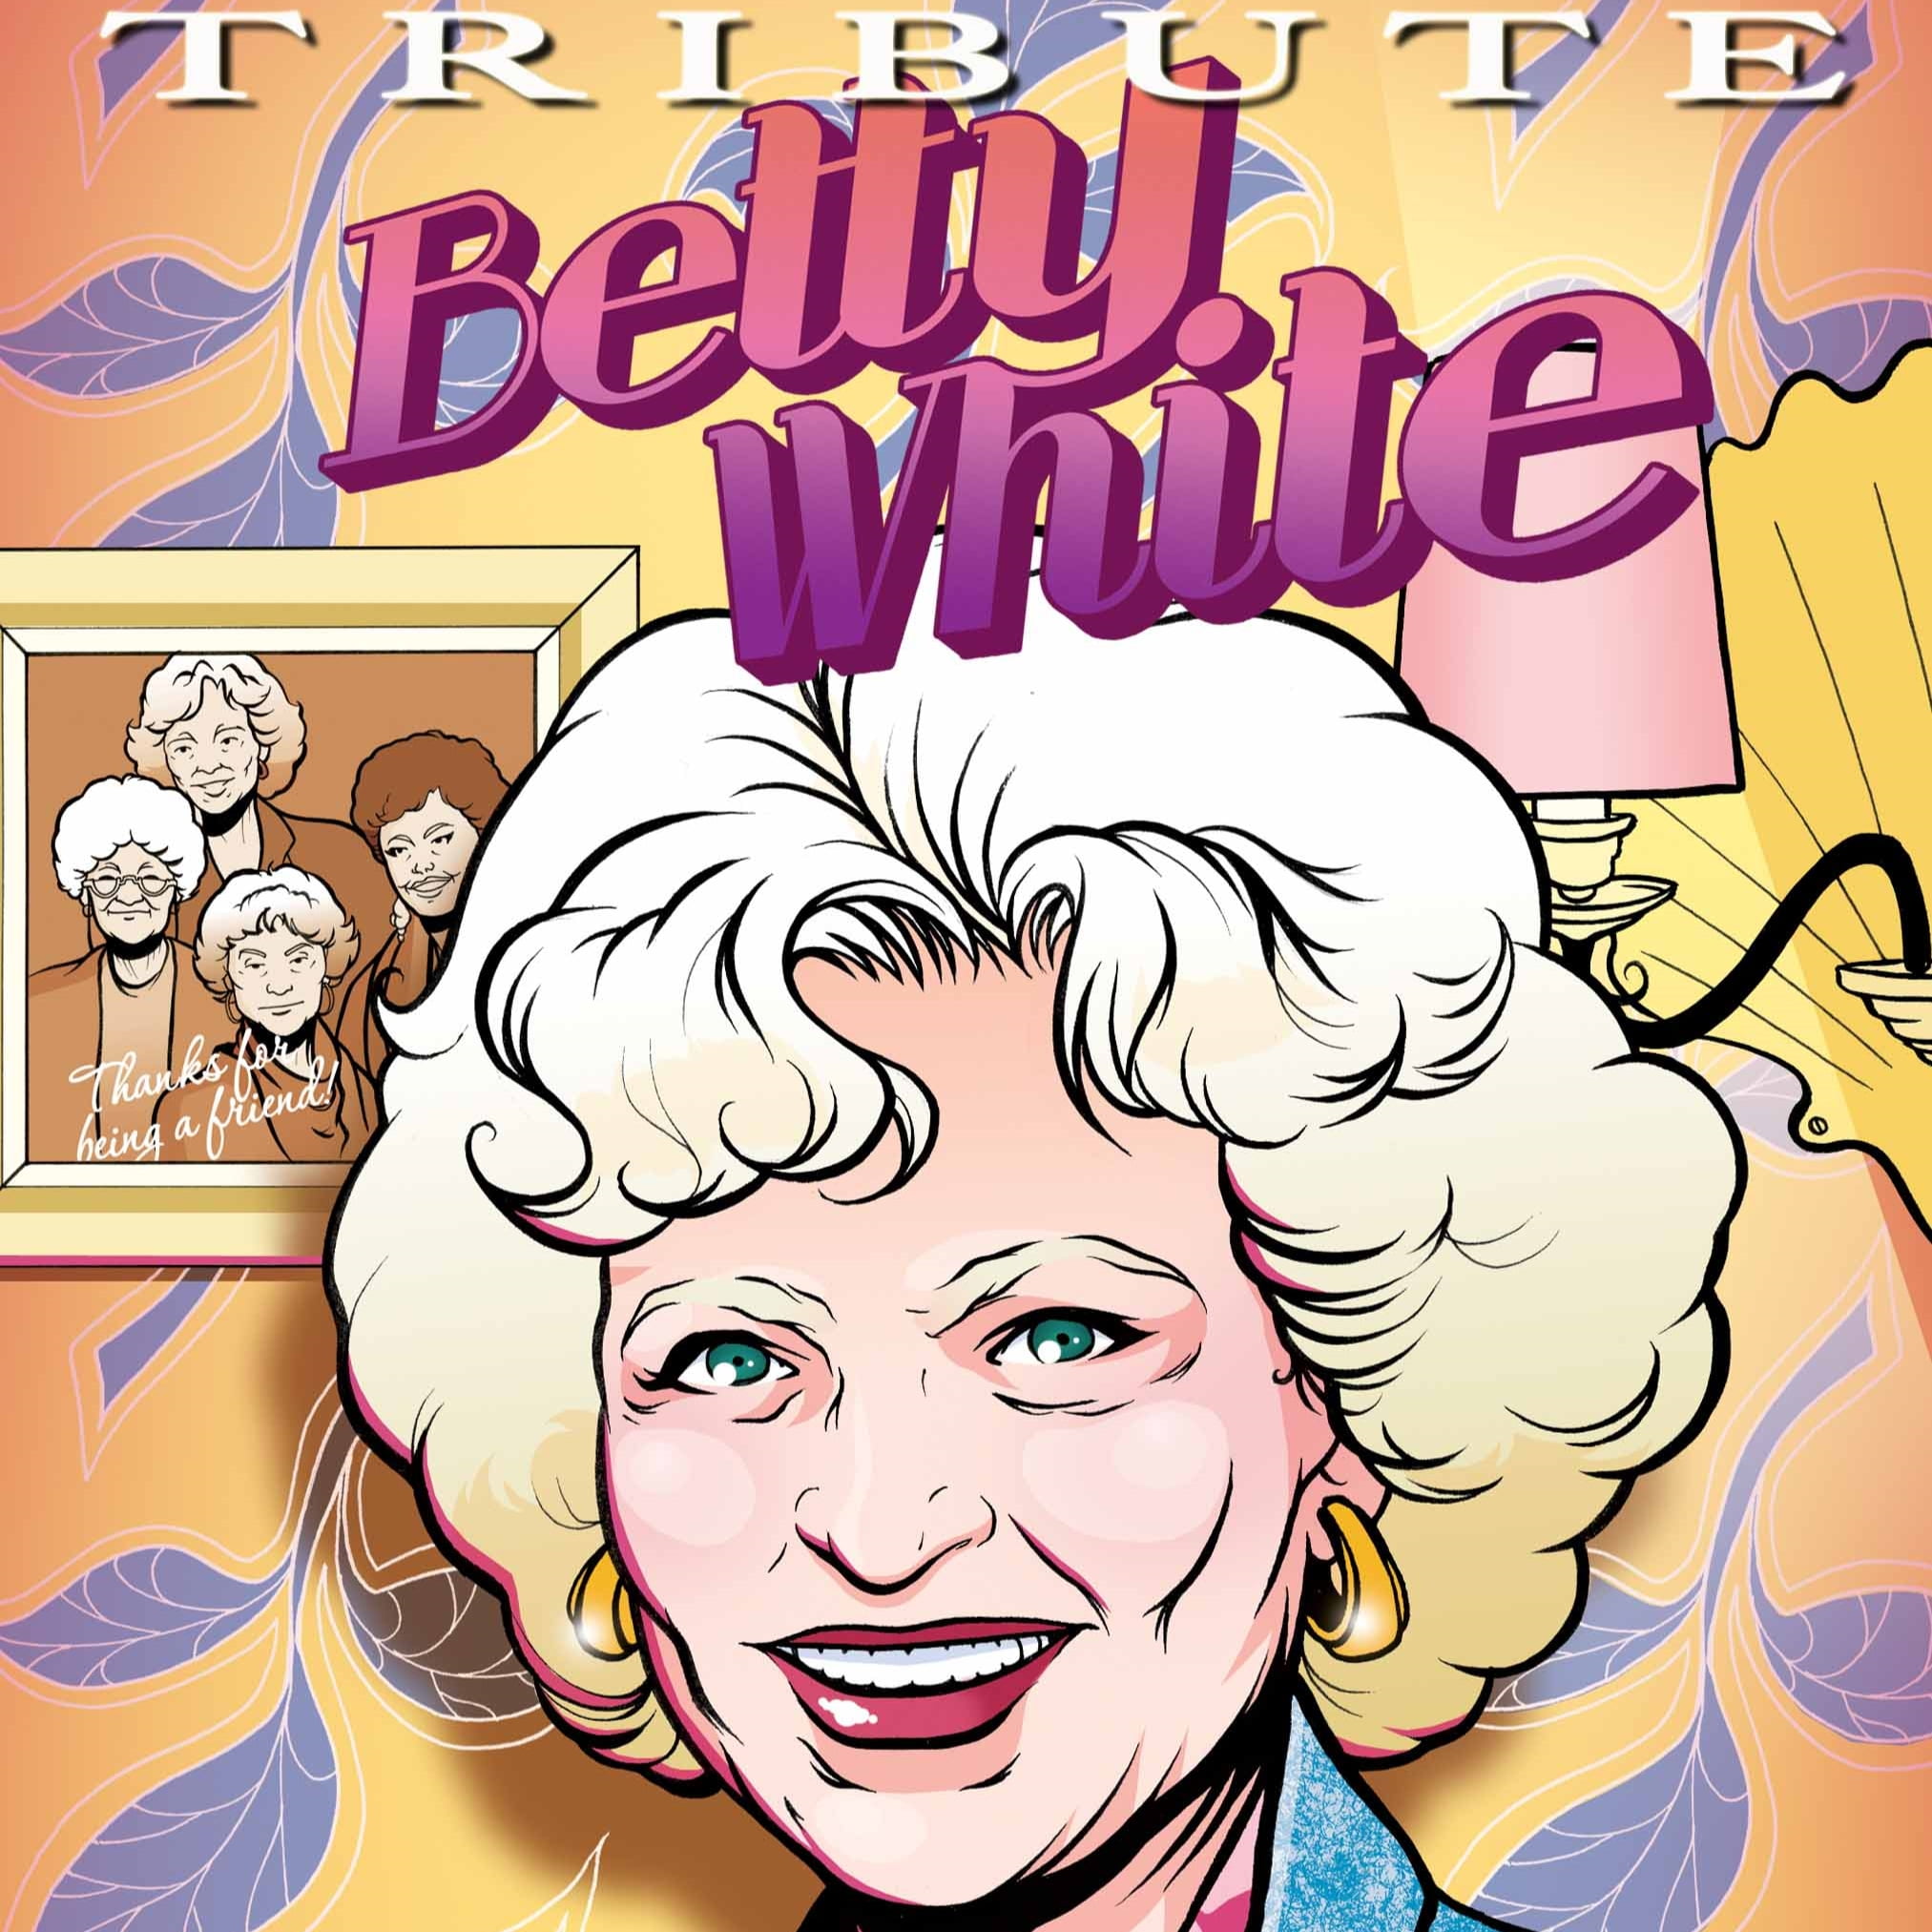 Tribute Betty White Cover via Tidal Wave Comics for use by 360 Magazine